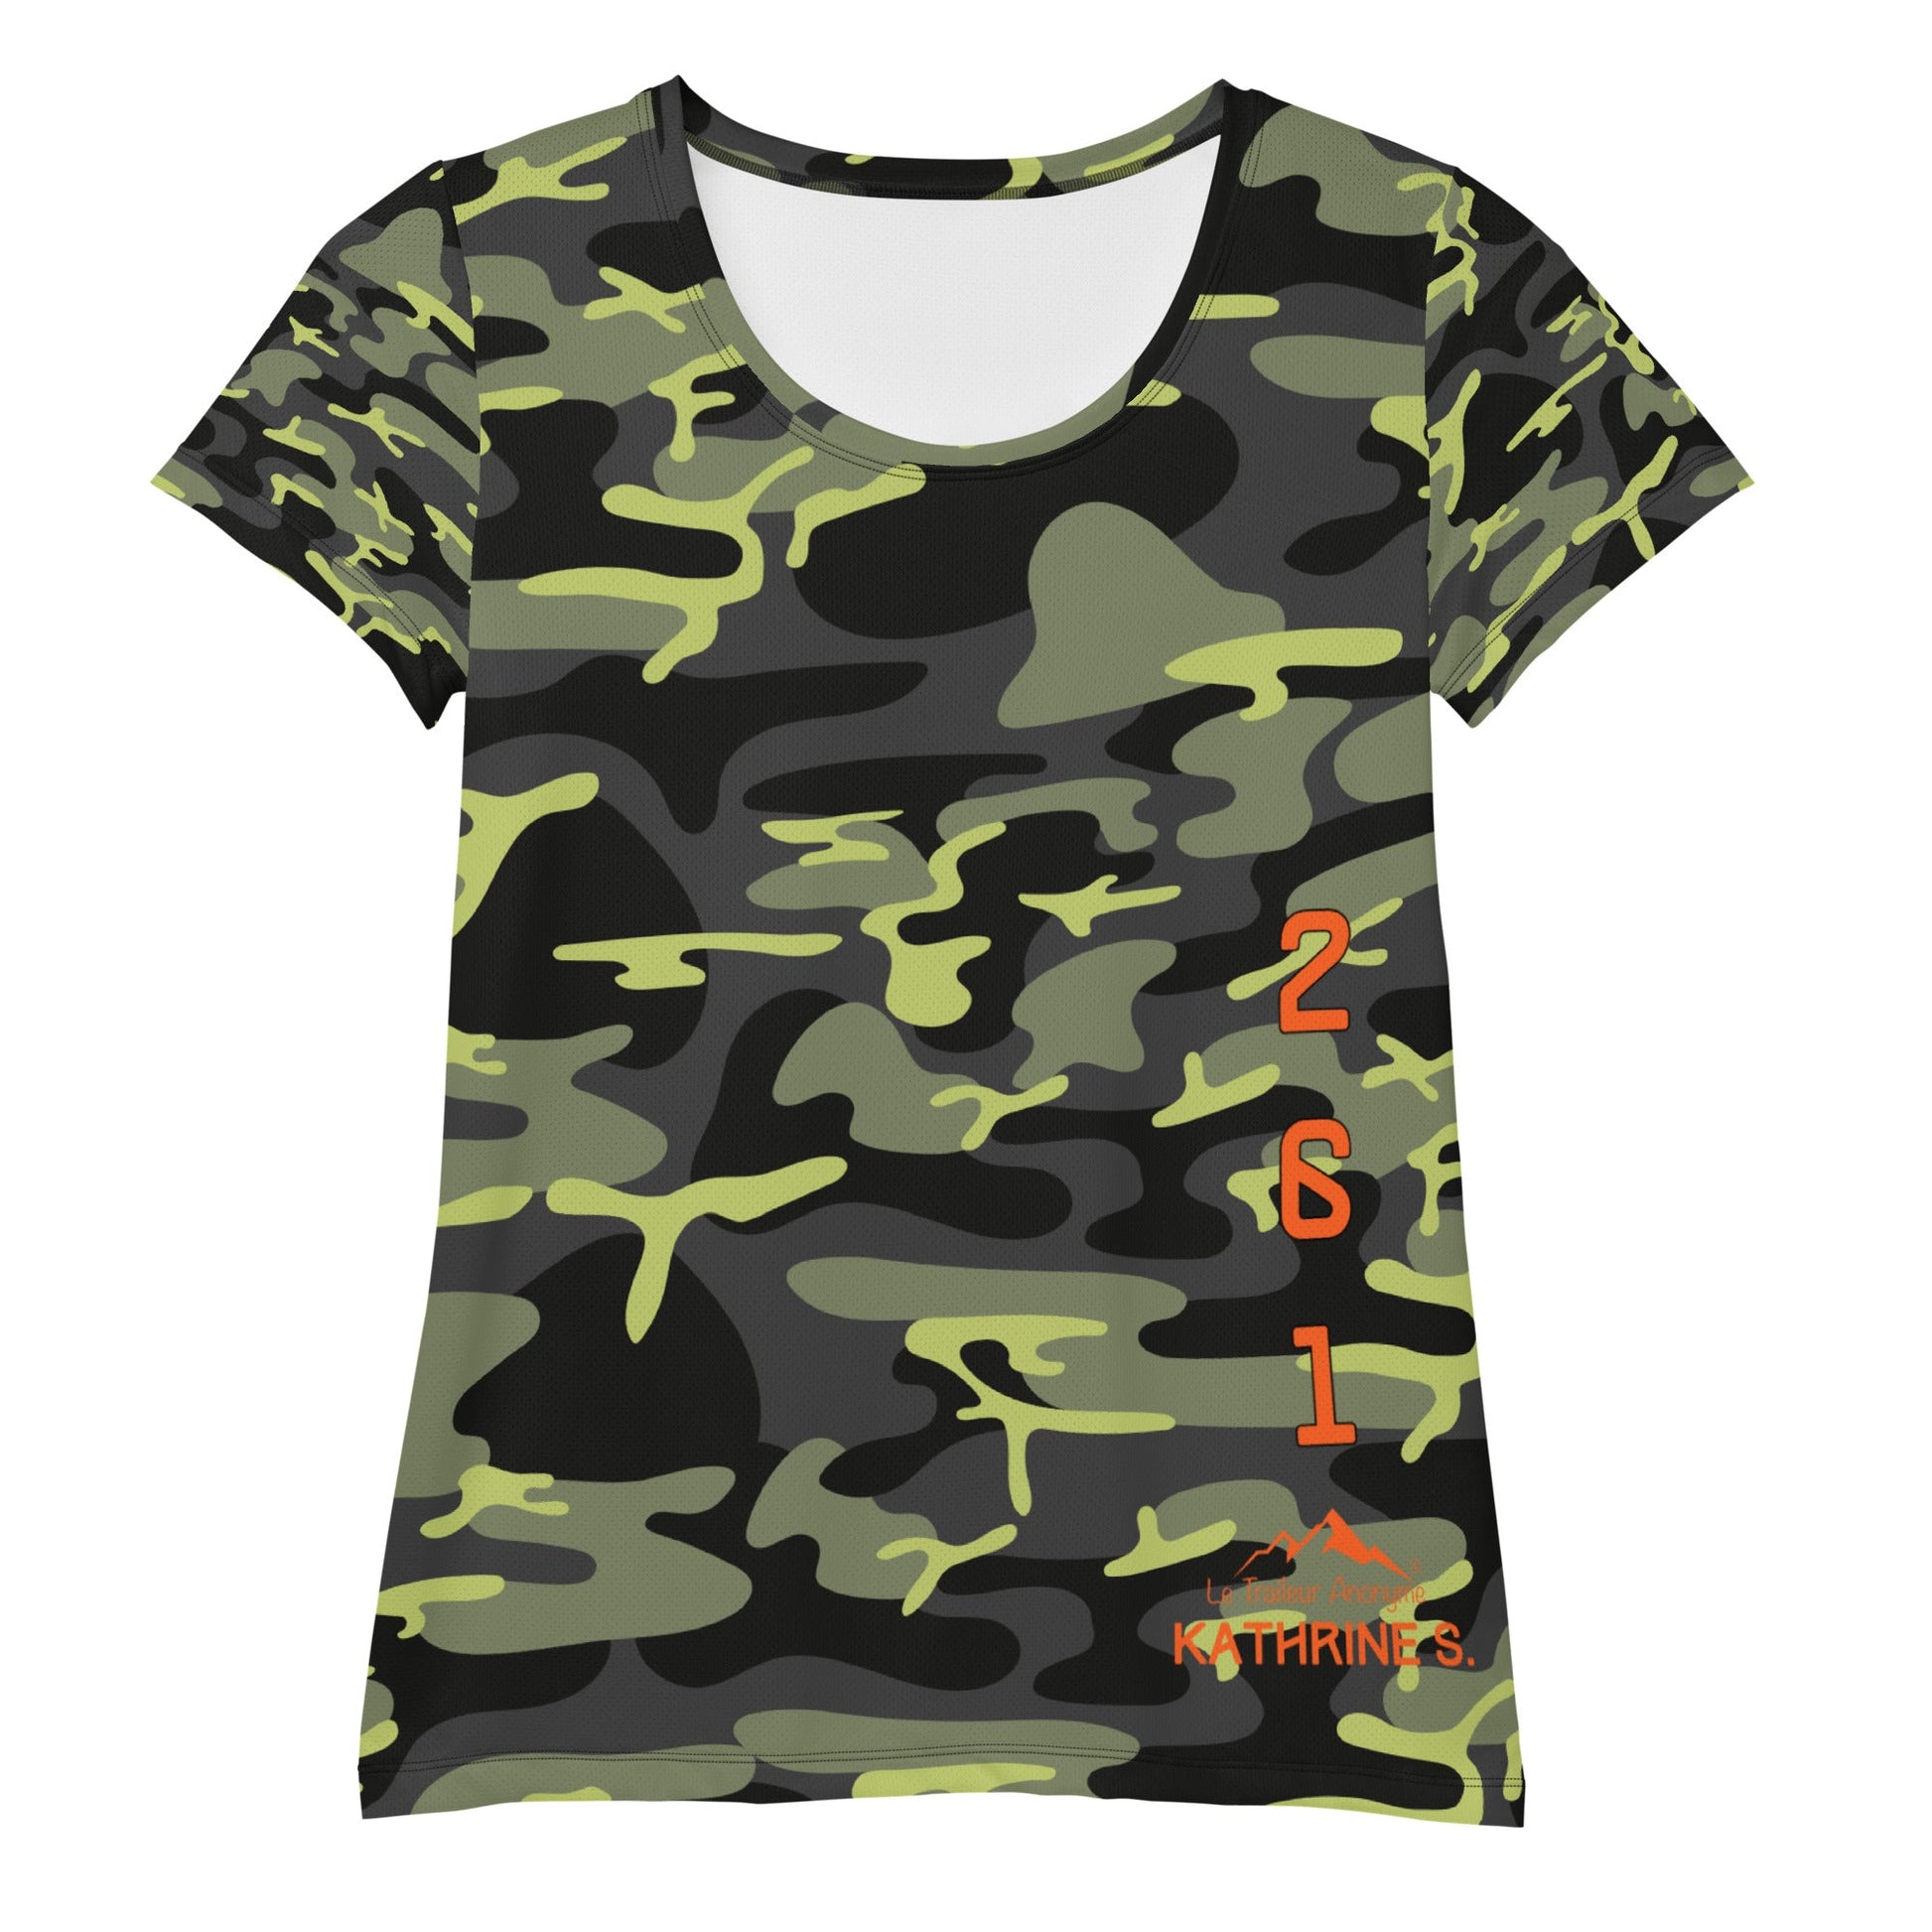 T-Shirt Sport - Femme - Collection Hommage Army - Kathrine S. - Le Traileur Anonyme